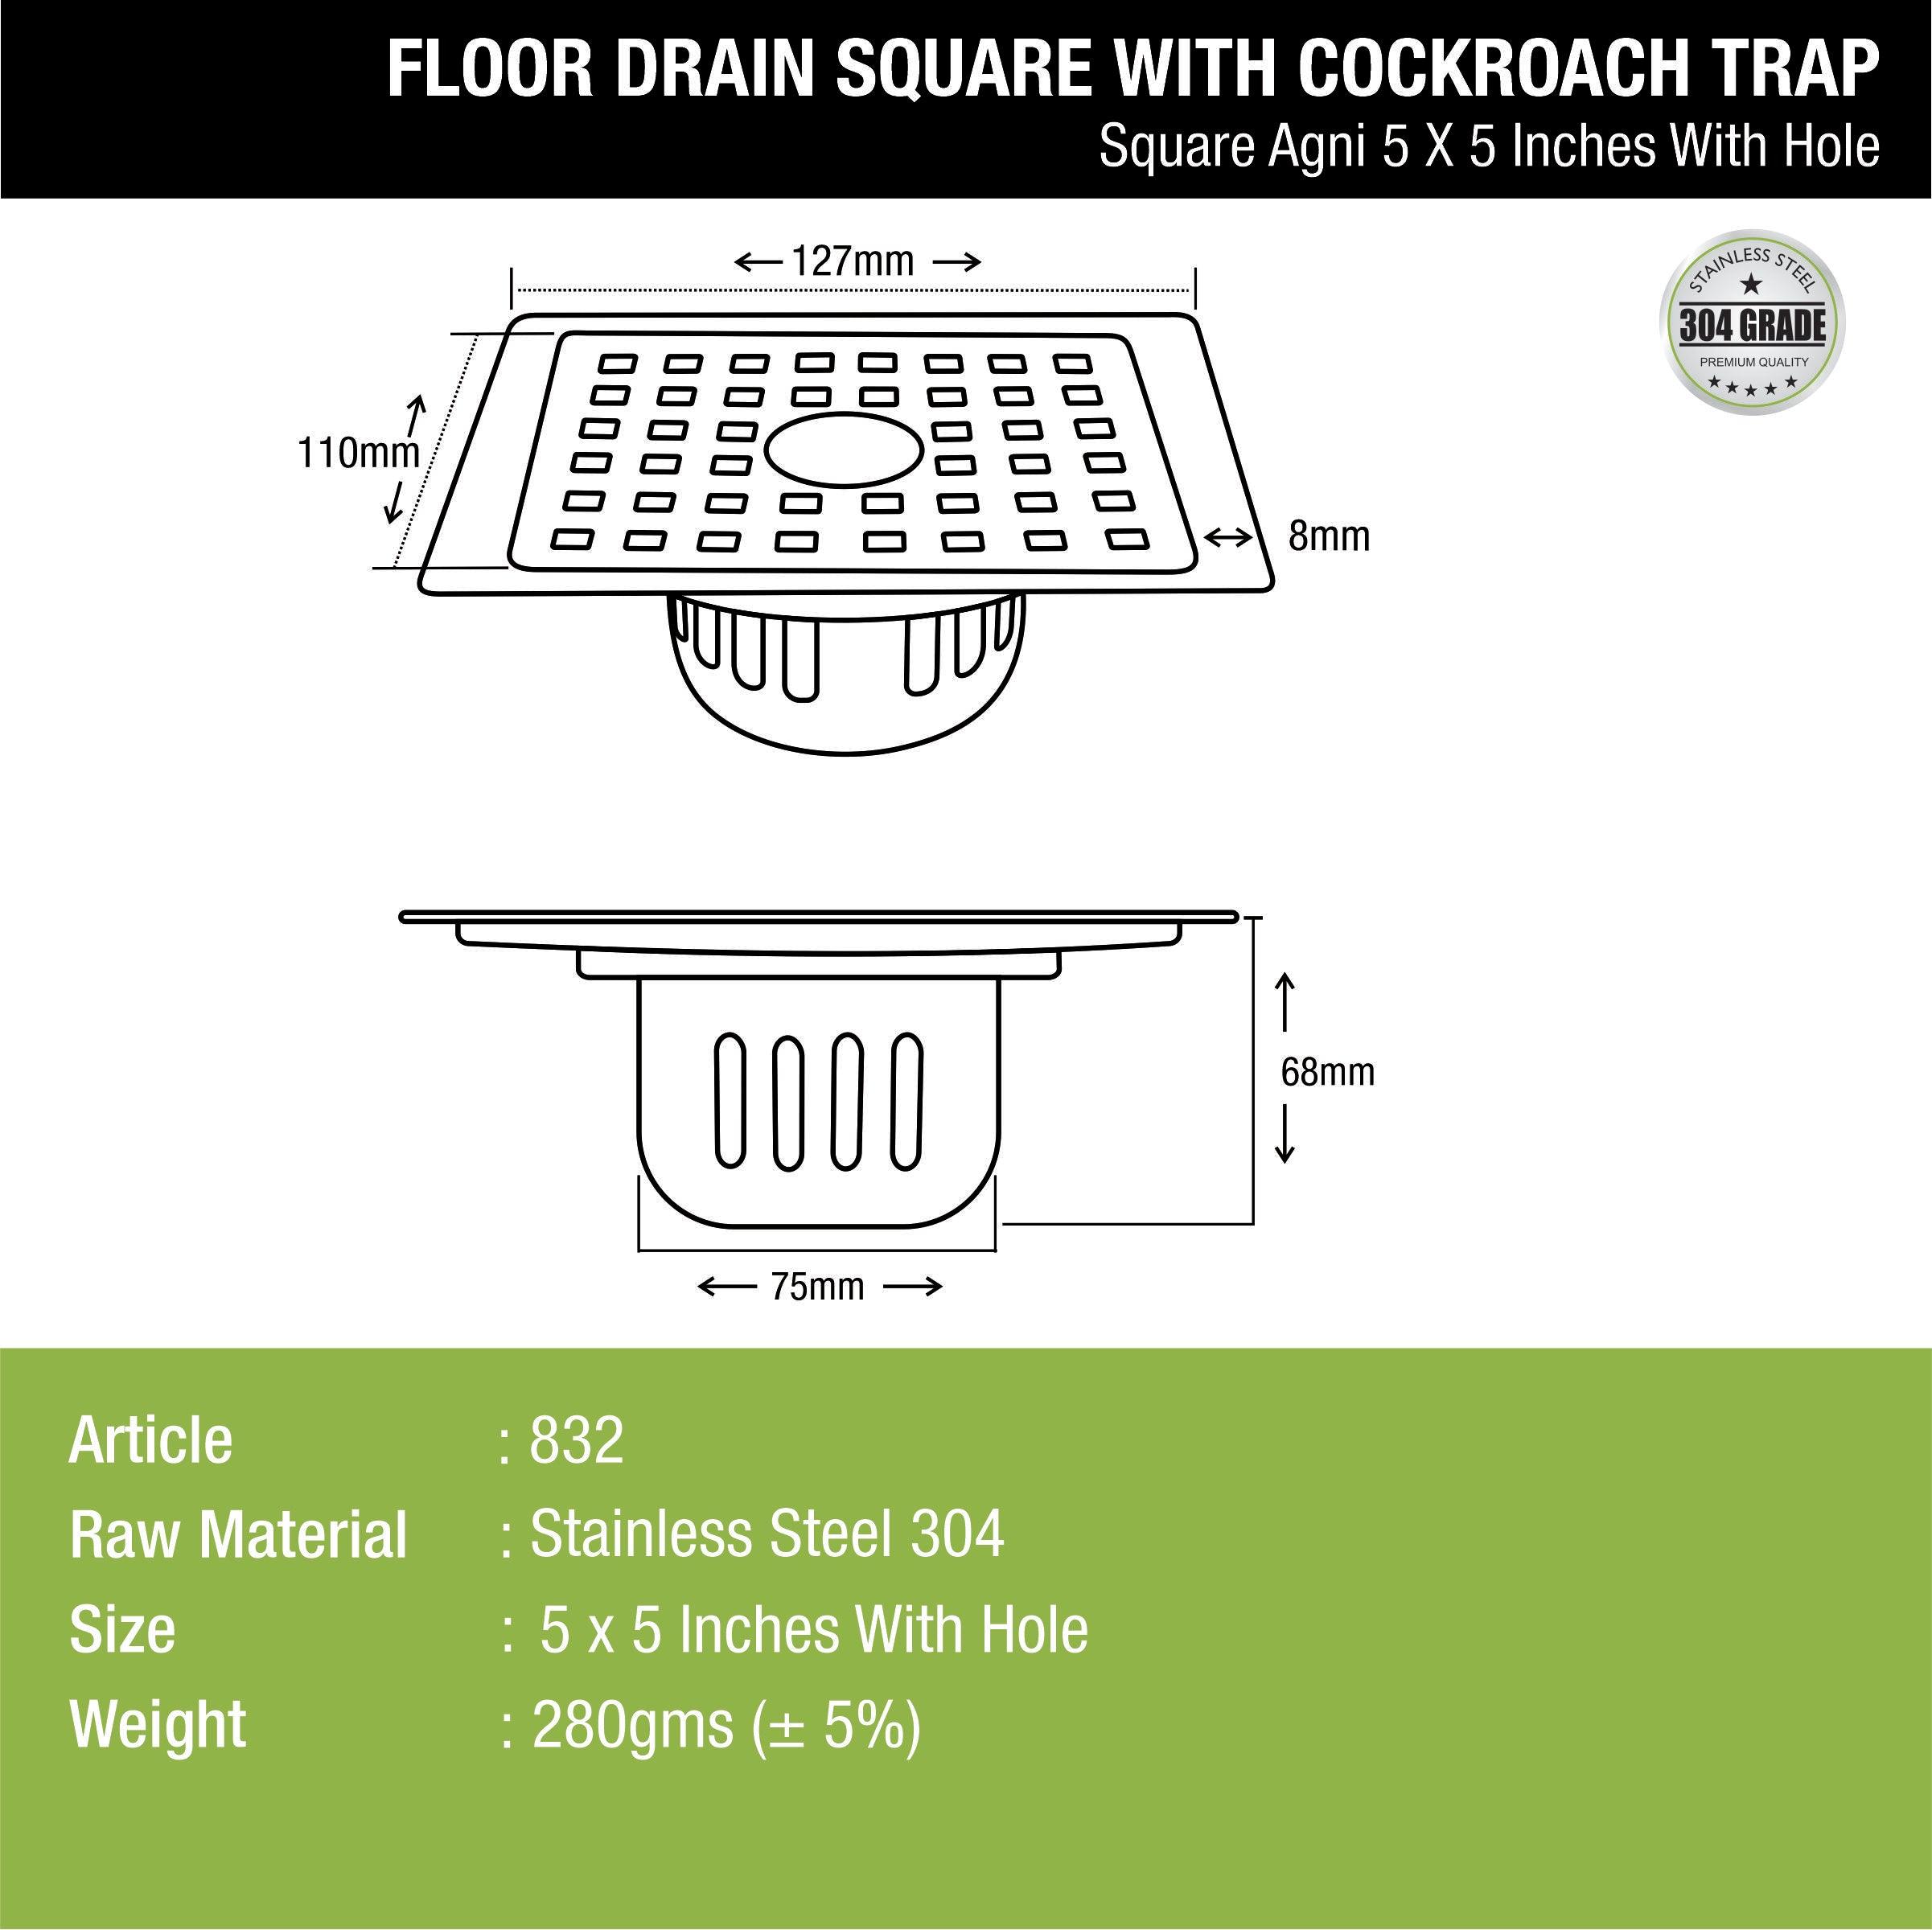 Agni Square Floor Drain (5 x 5 Inches) with Hole and Cockroach Trap- LIPKA - Lipka Home